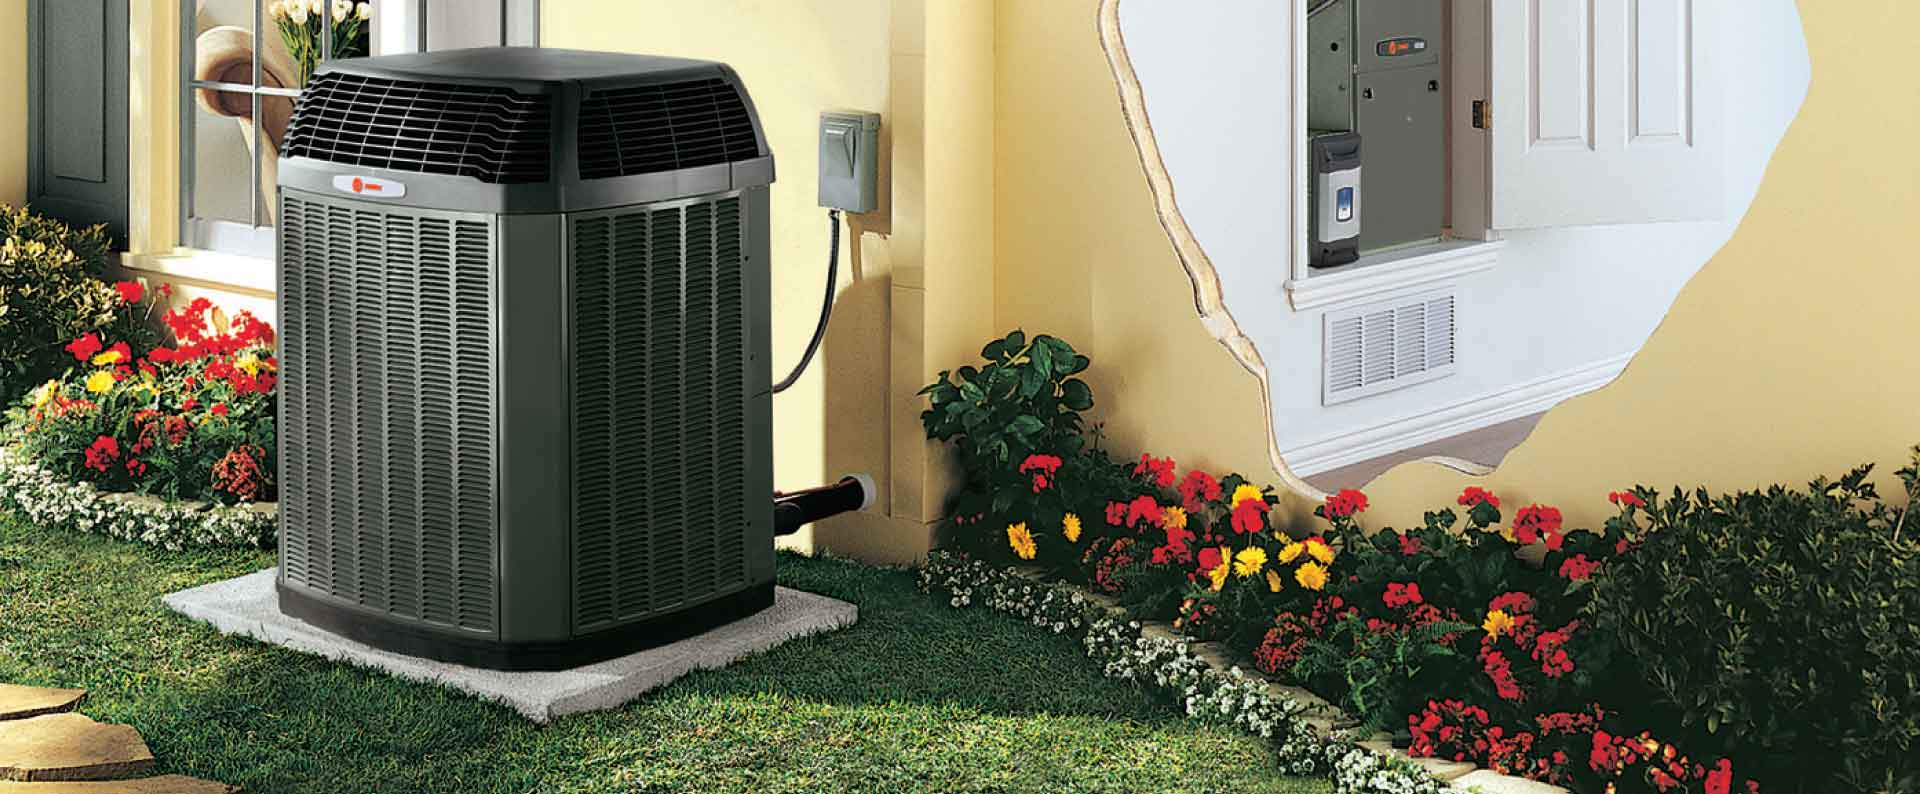 Belk's Heating And Air - Tifton, GA, US, heating and air conditioning